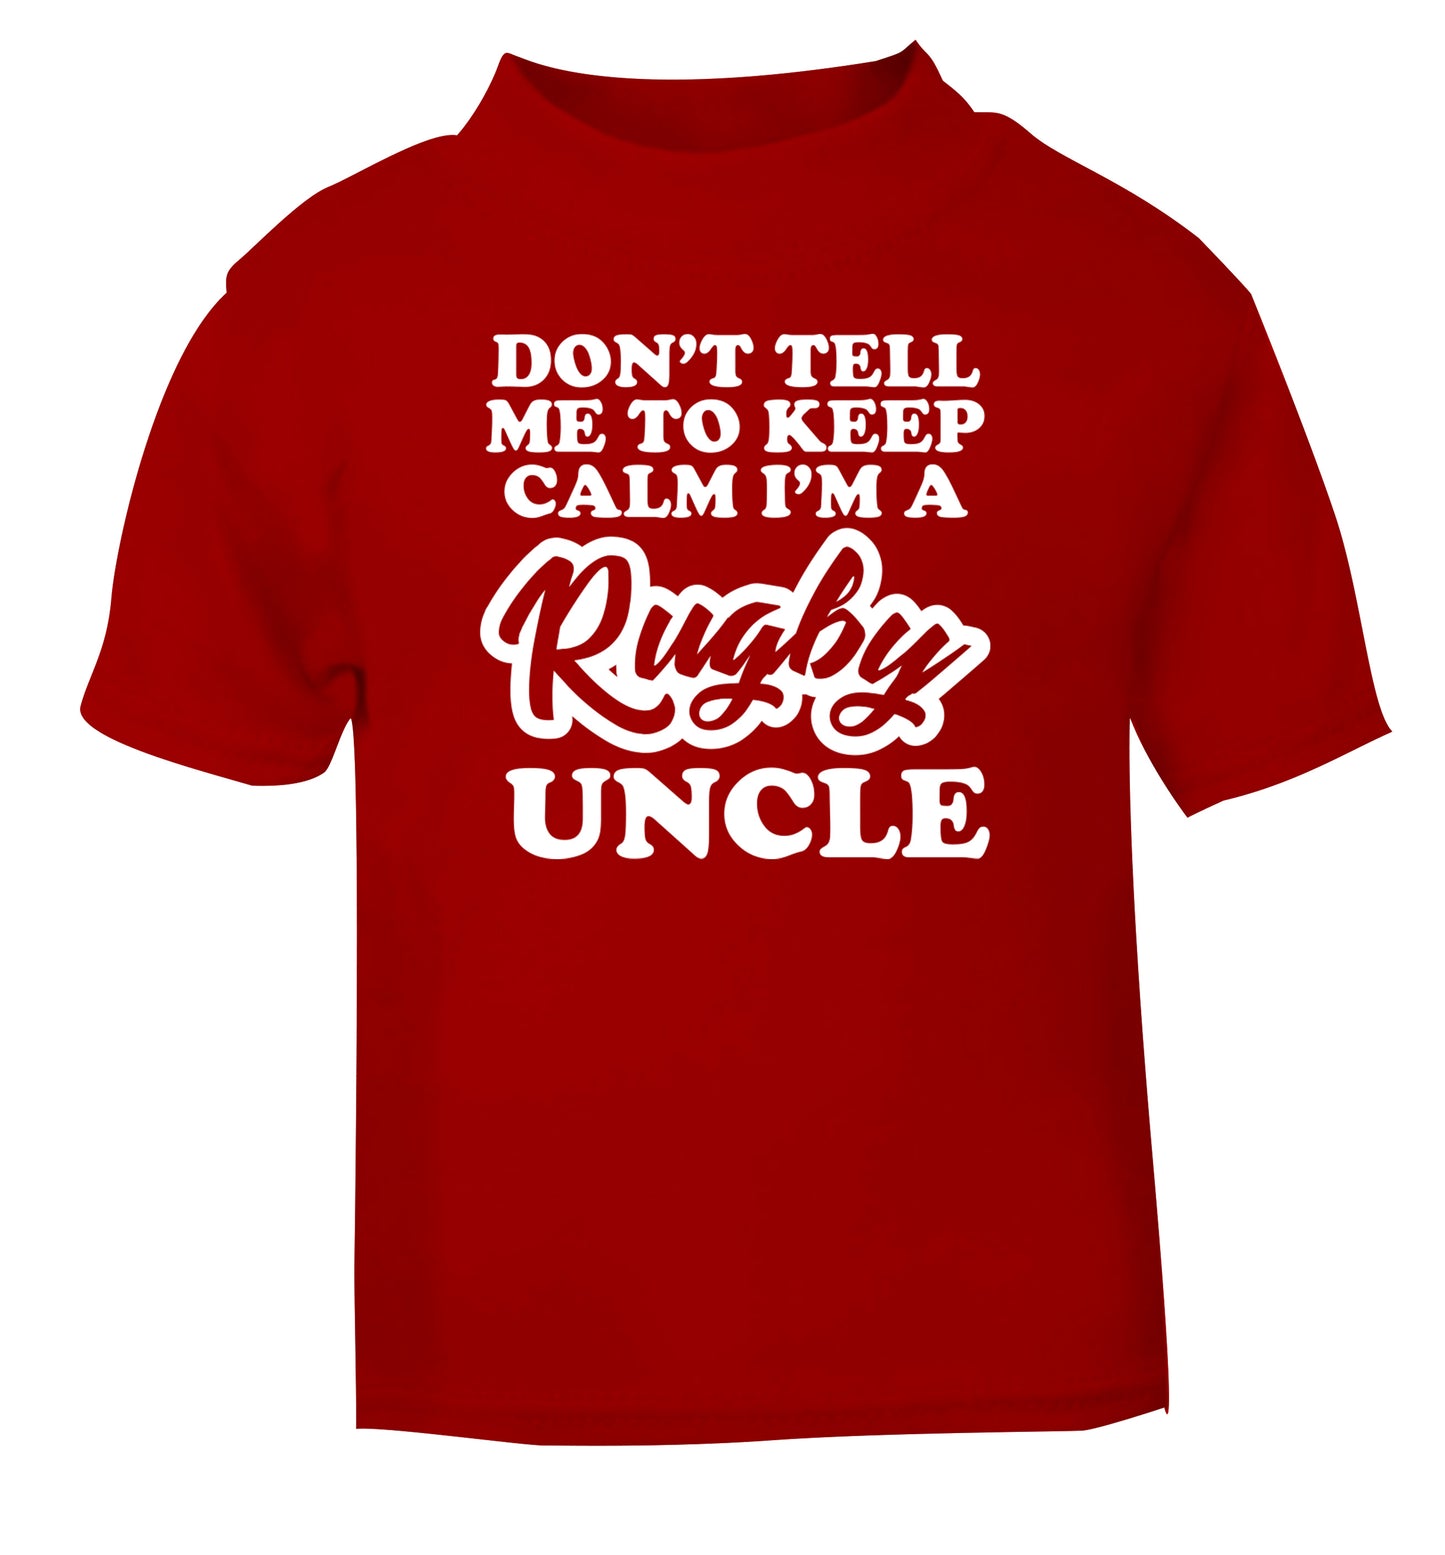 Don't tell me to keep calm I'm a rugby uncle red Baby Toddler Tshirt 2 Years